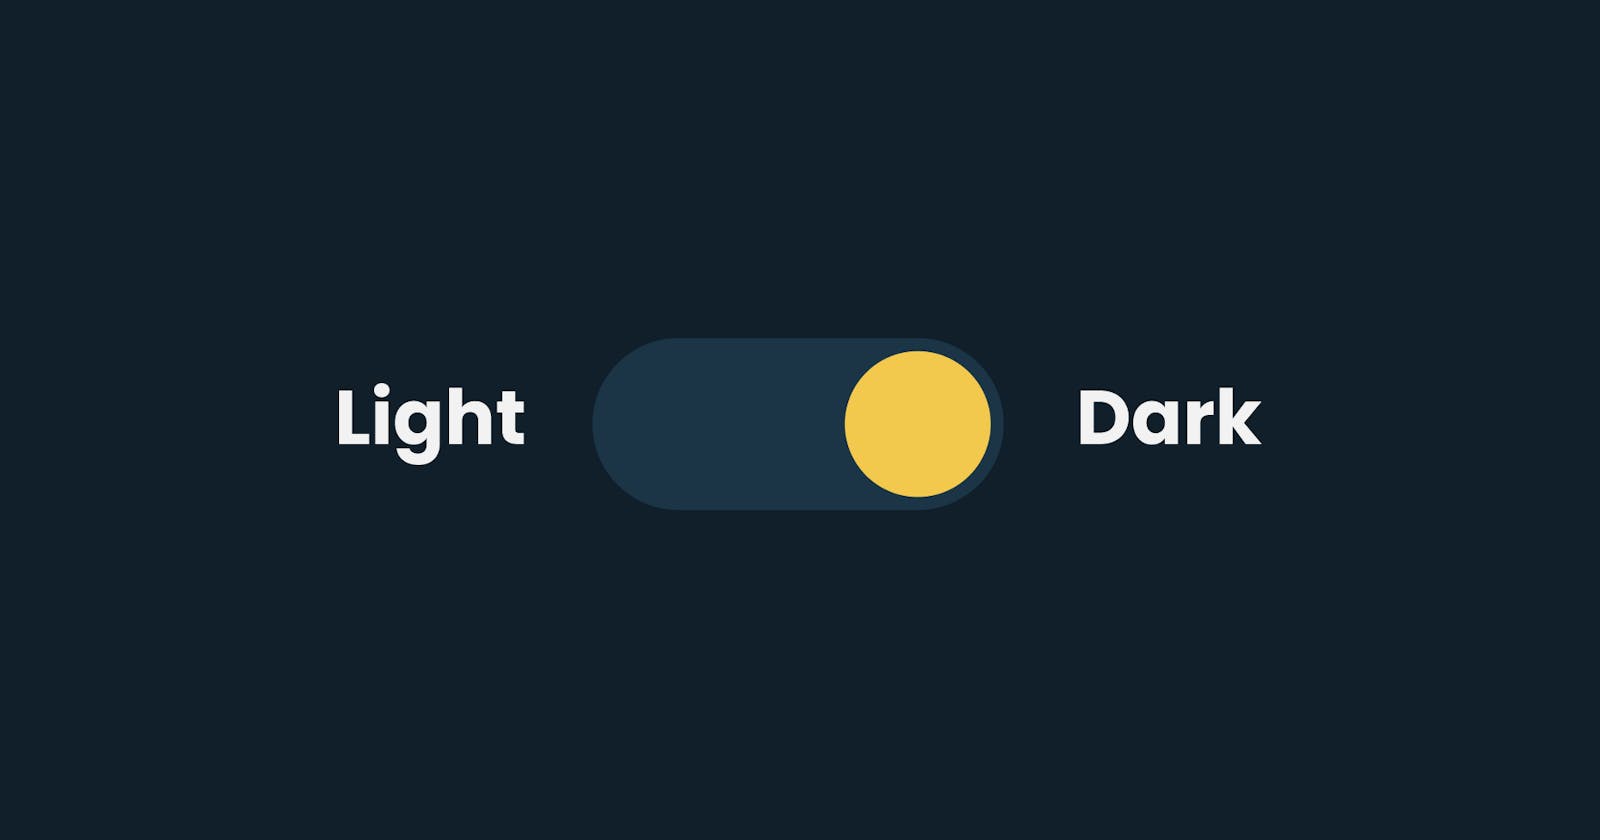 Switch to Dark Mode using Only CSS variables